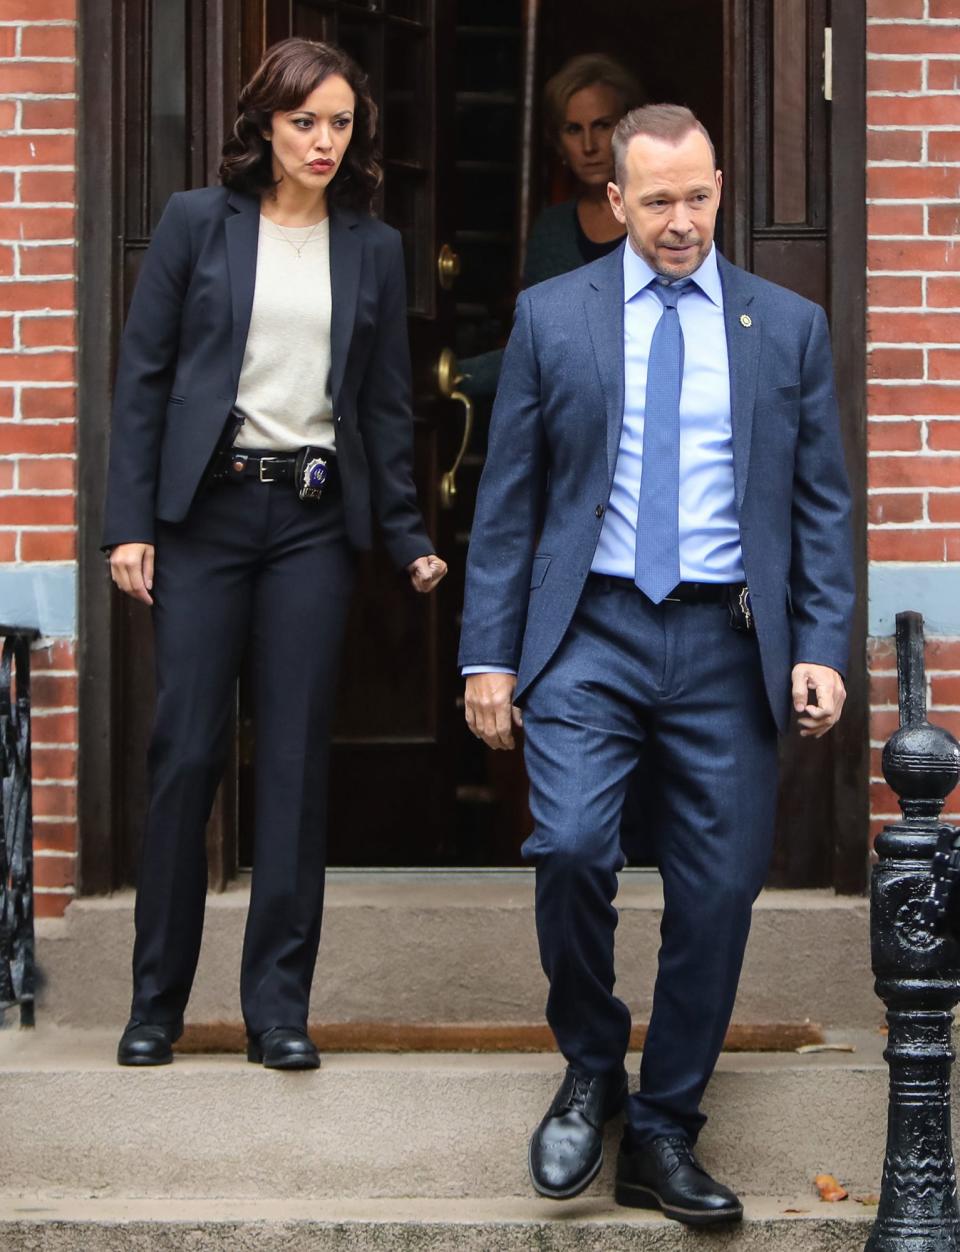 <p>Marisa Ramirez and Donnie Wahlberg are seen on the set of <i>Blue Bloods</i> on Monday in N.Y.C. </p>